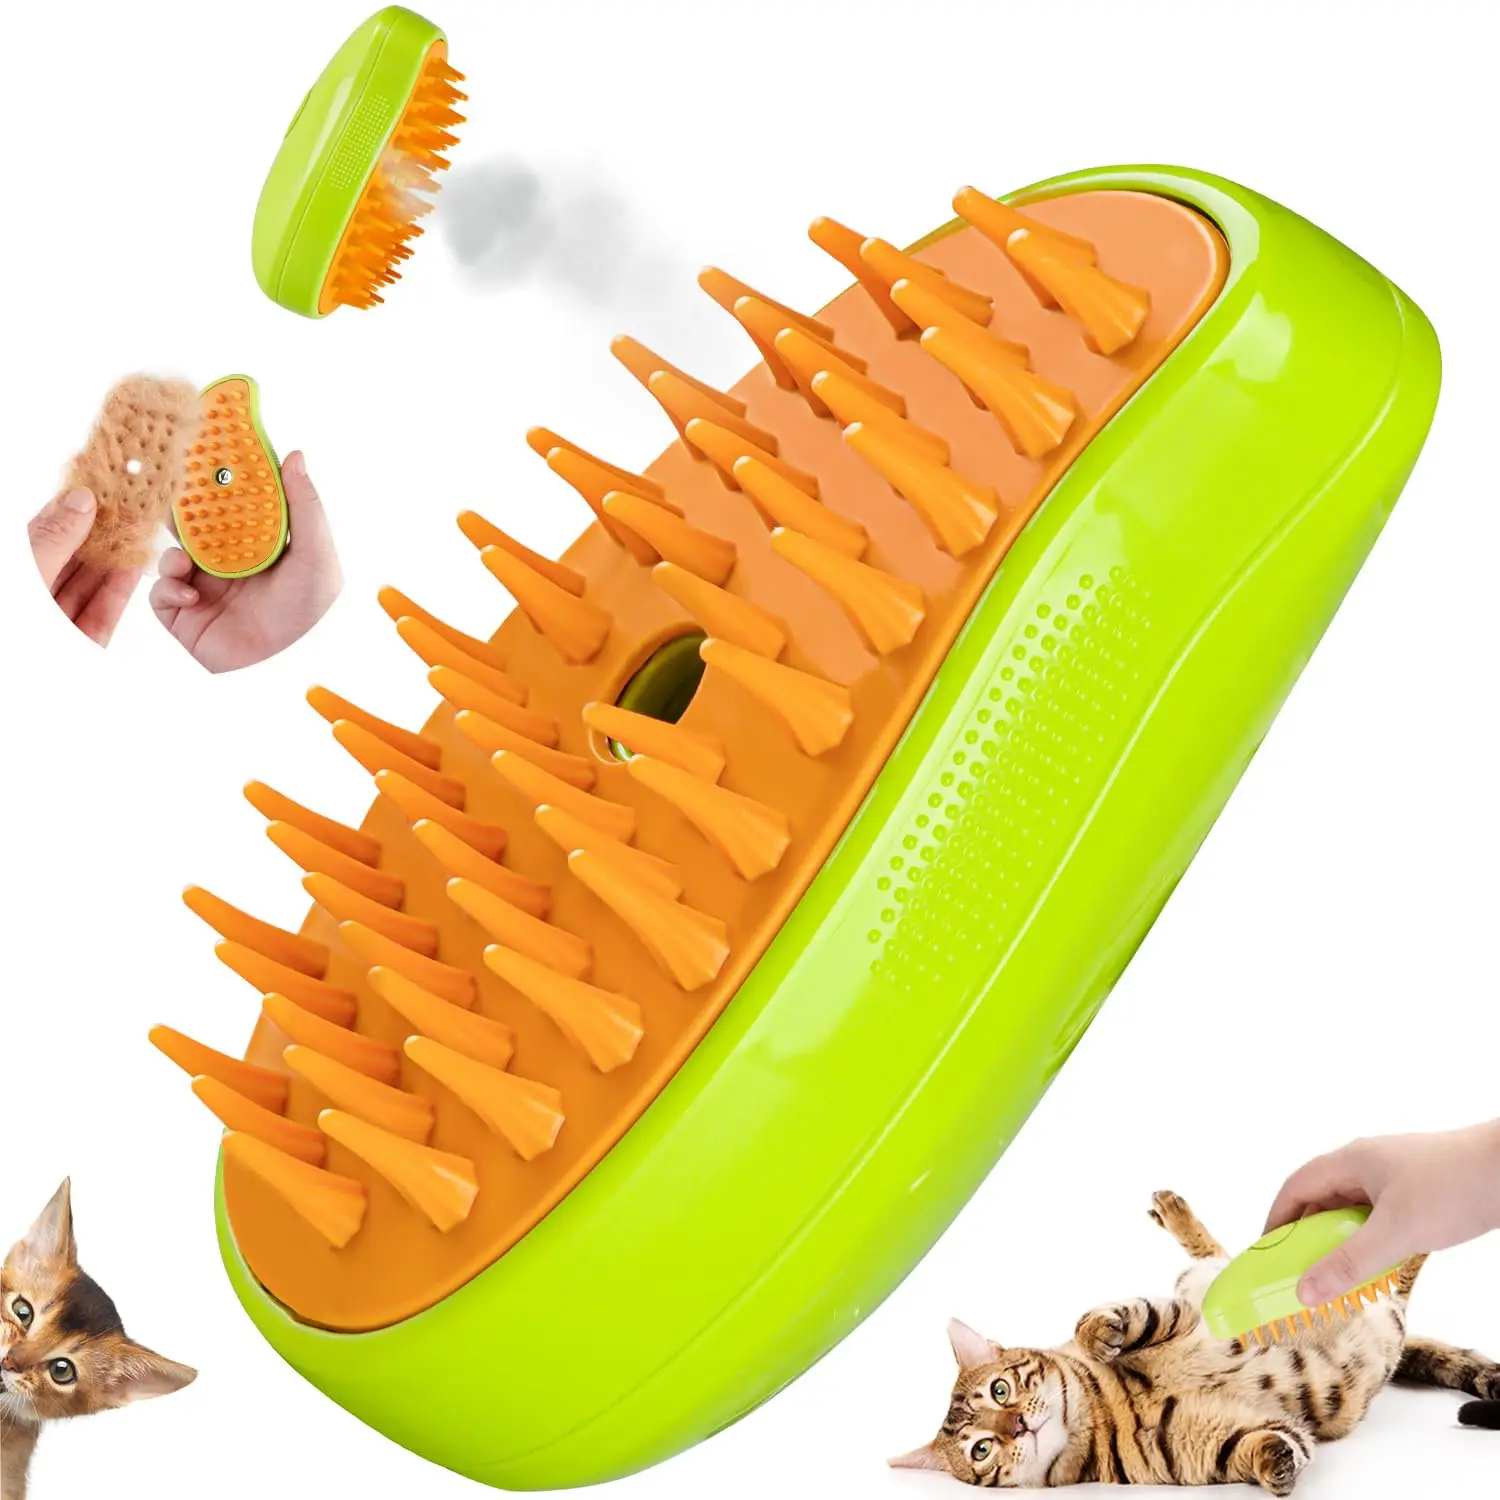 

Cat Steam Brush Steamy Dog Massage Comb 3 in 1 Electric Spray Pet Grooming Comb Soft Silicone Removing Tangled and Loose Hair